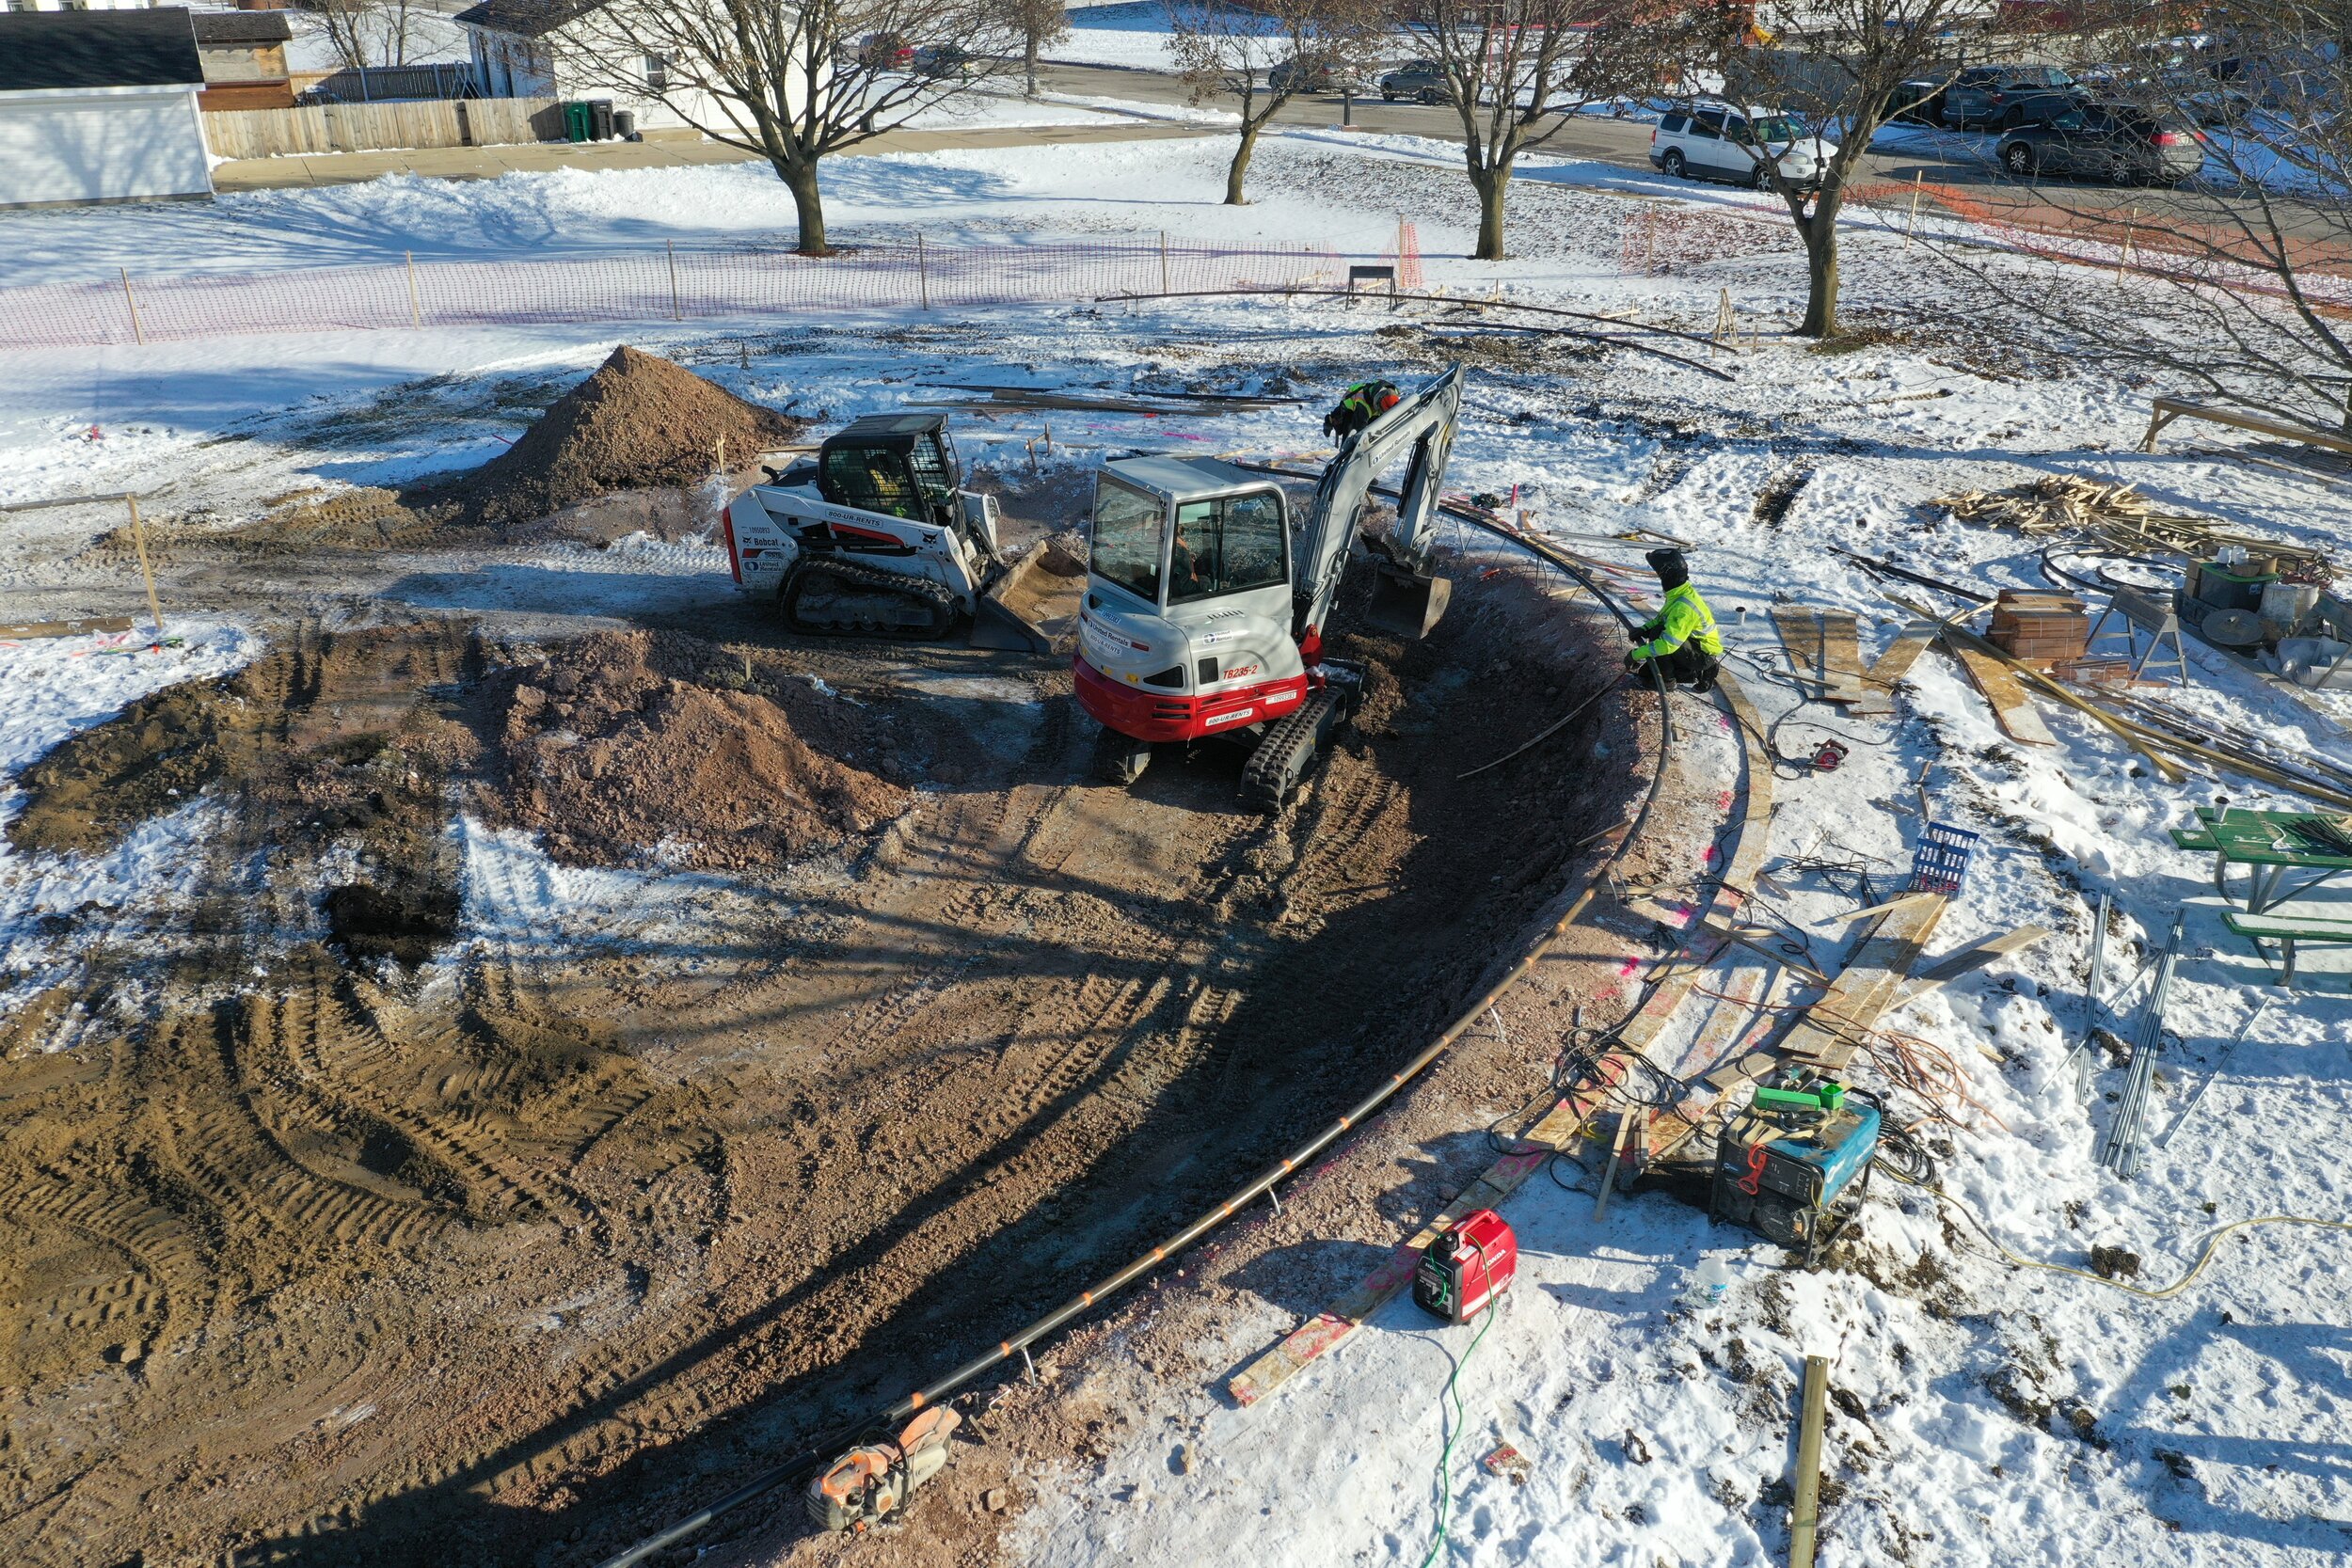 Working through the wintry 🥶 conditions to bring Wisconsin a new Evergreen park 💥